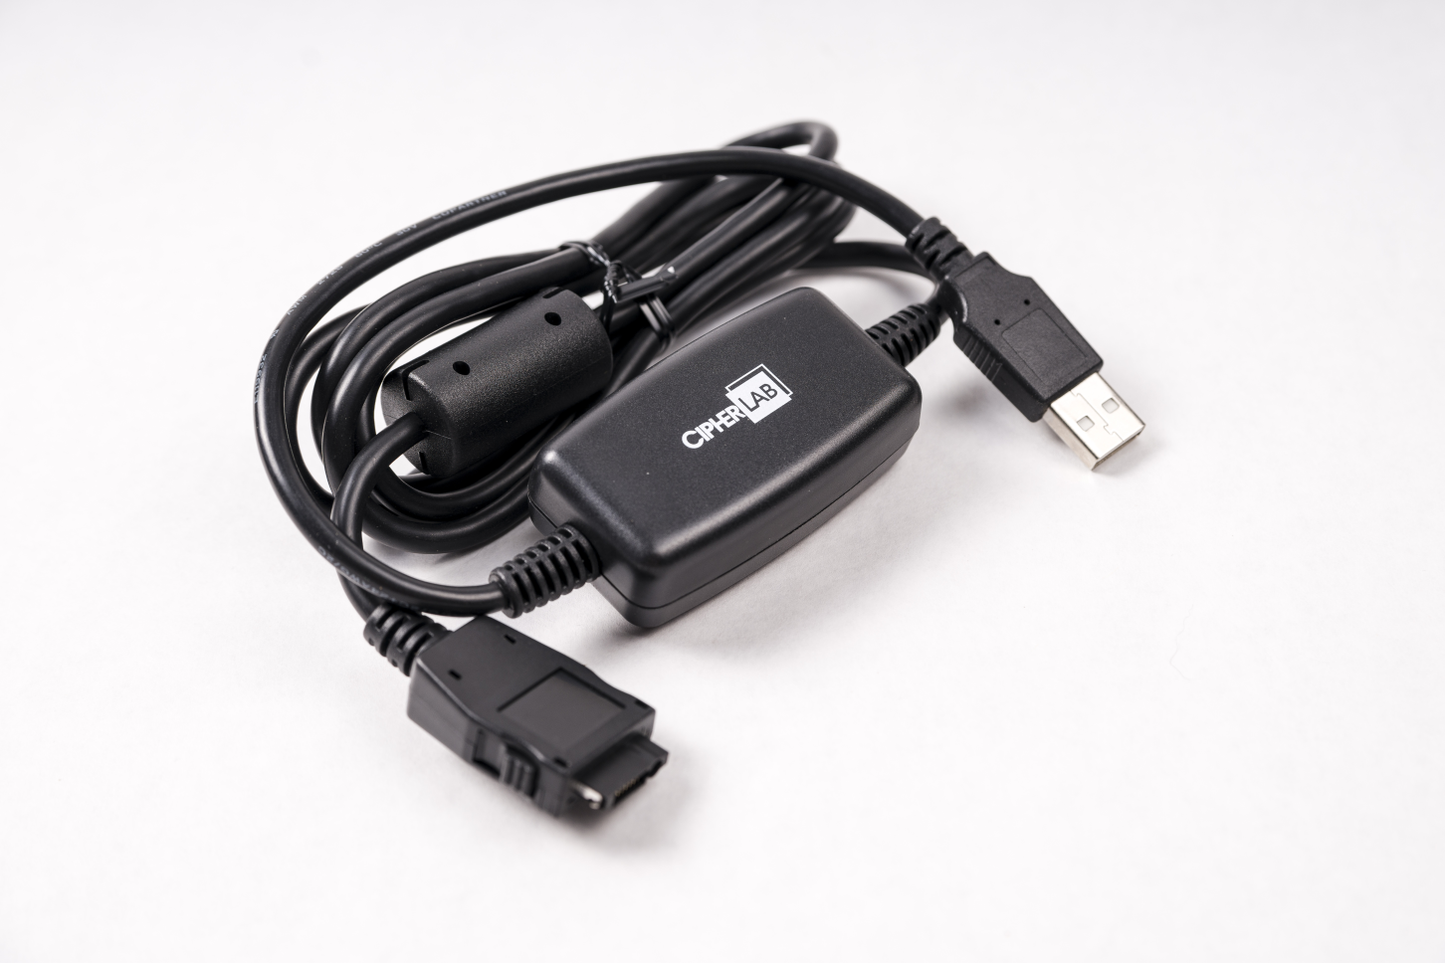 Cipher 8300 USB Cable